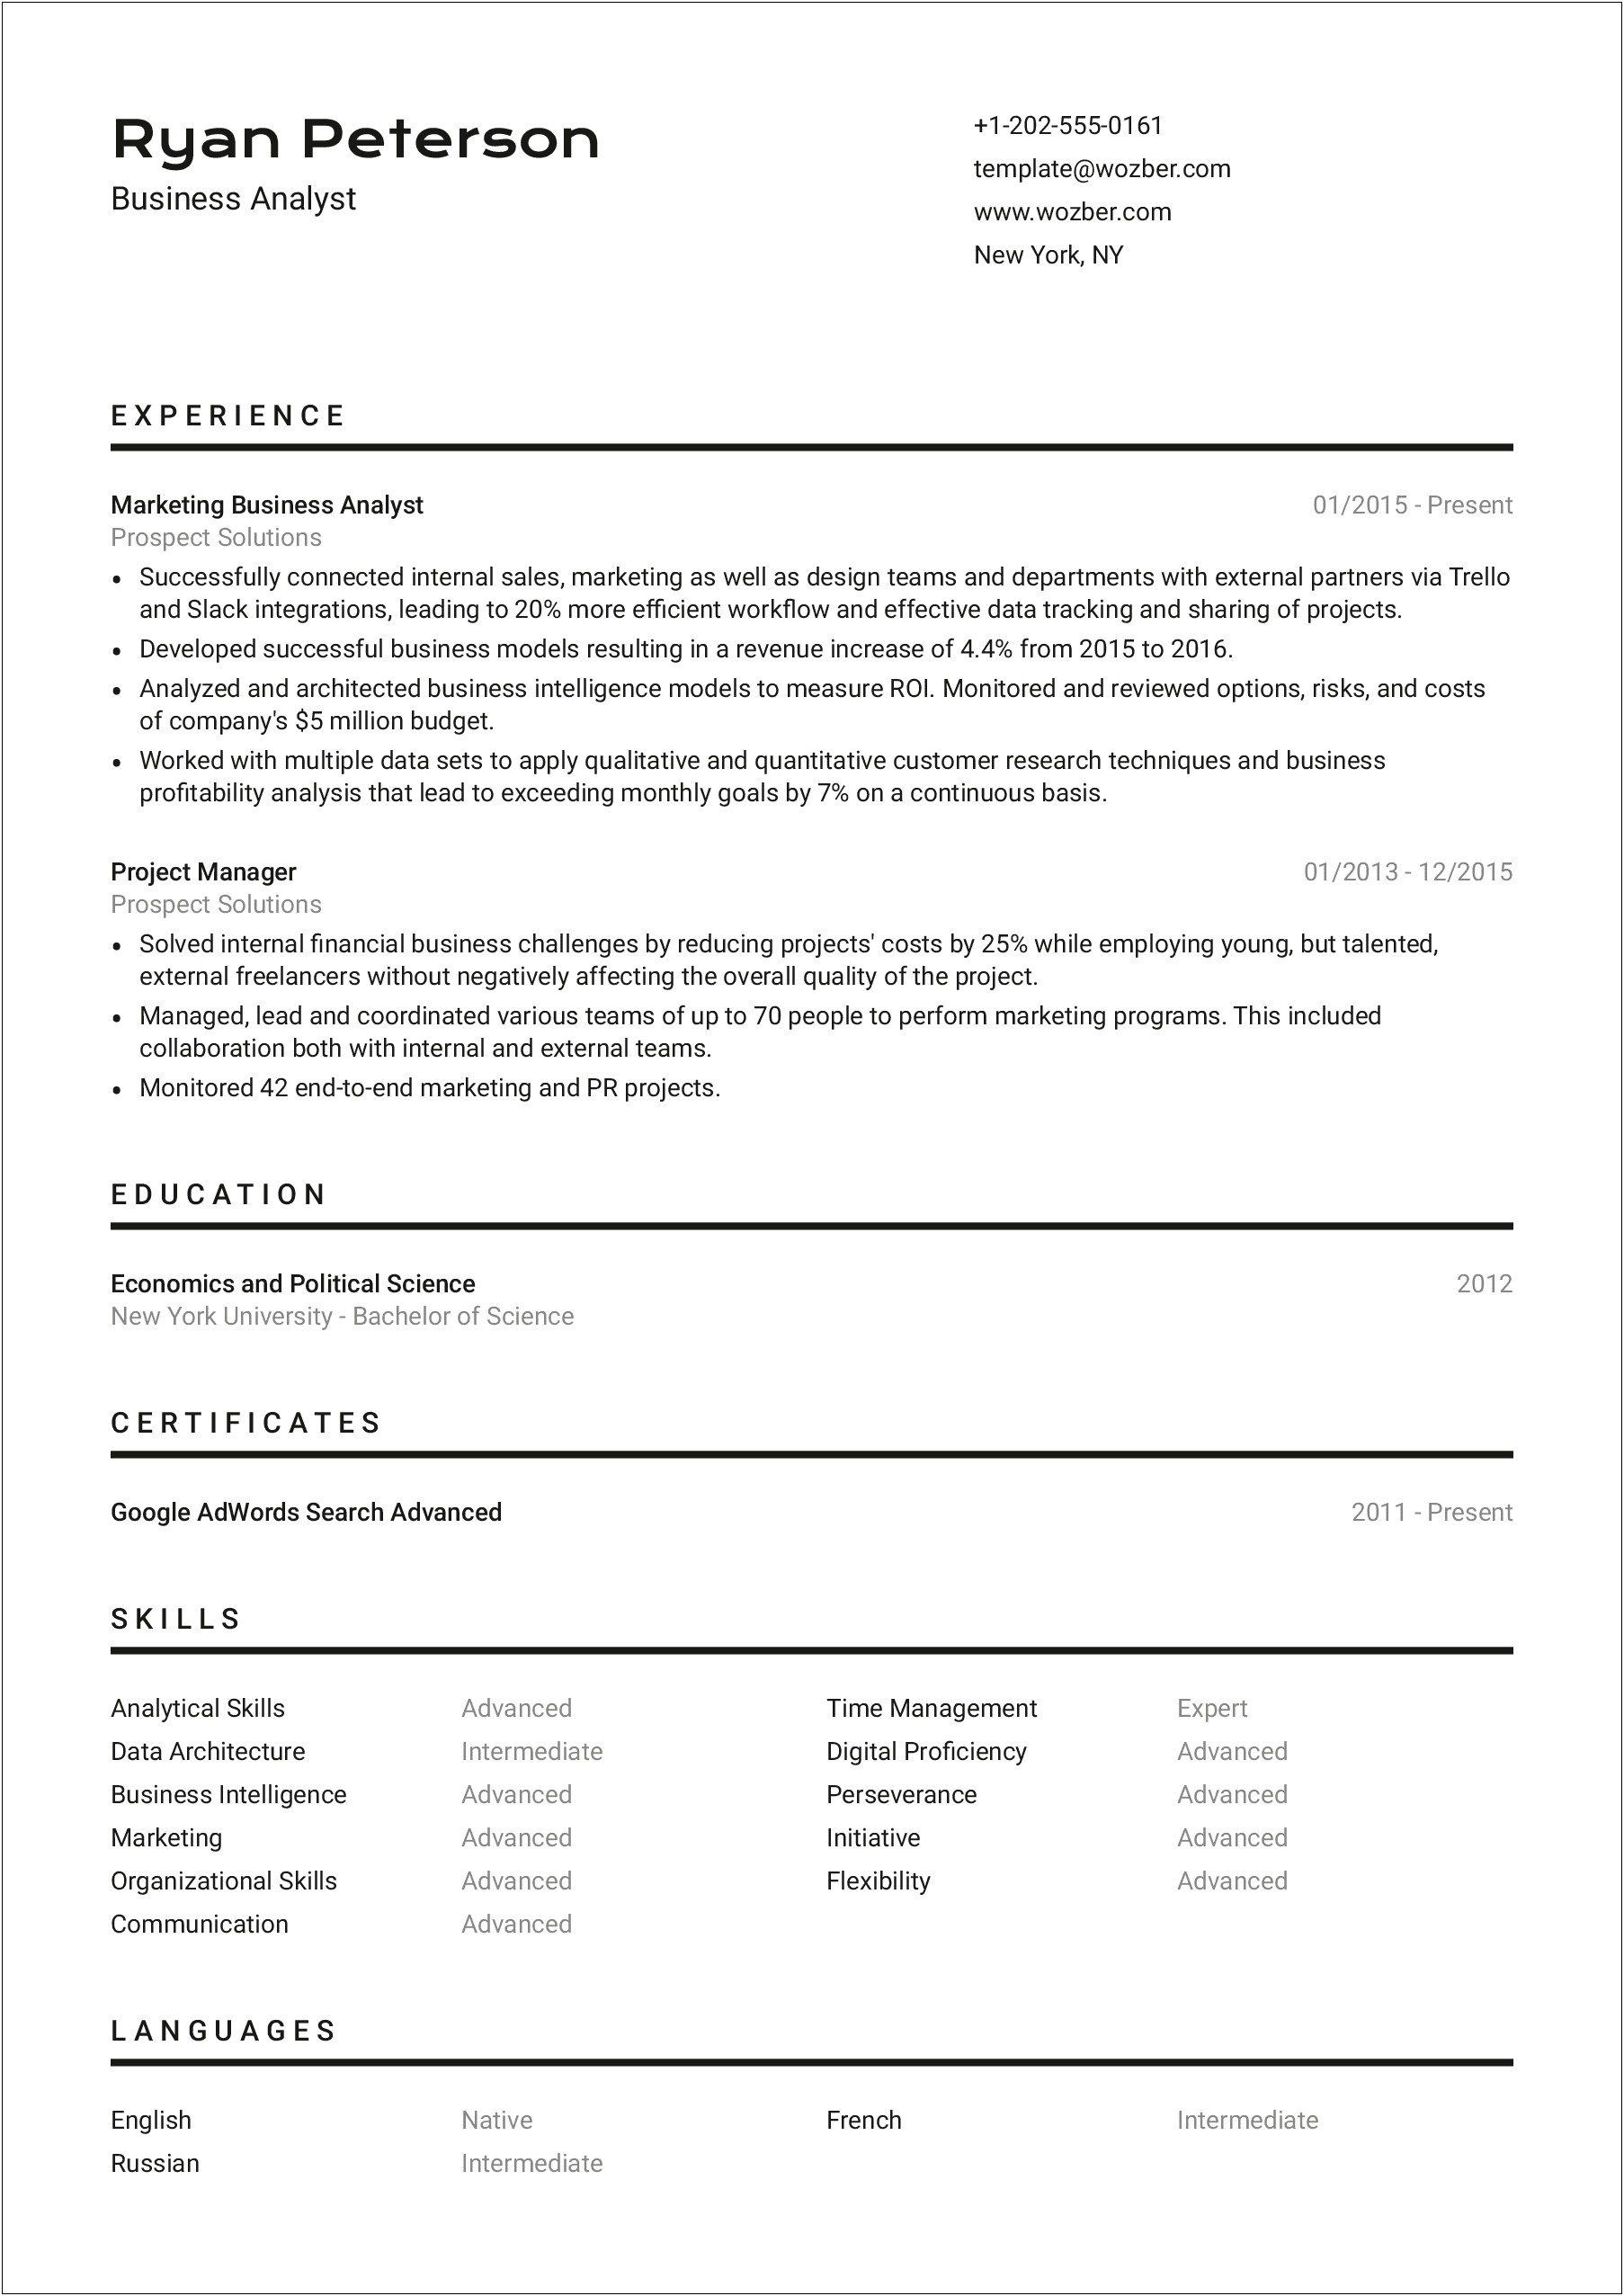 Resume Template For Us Jobs